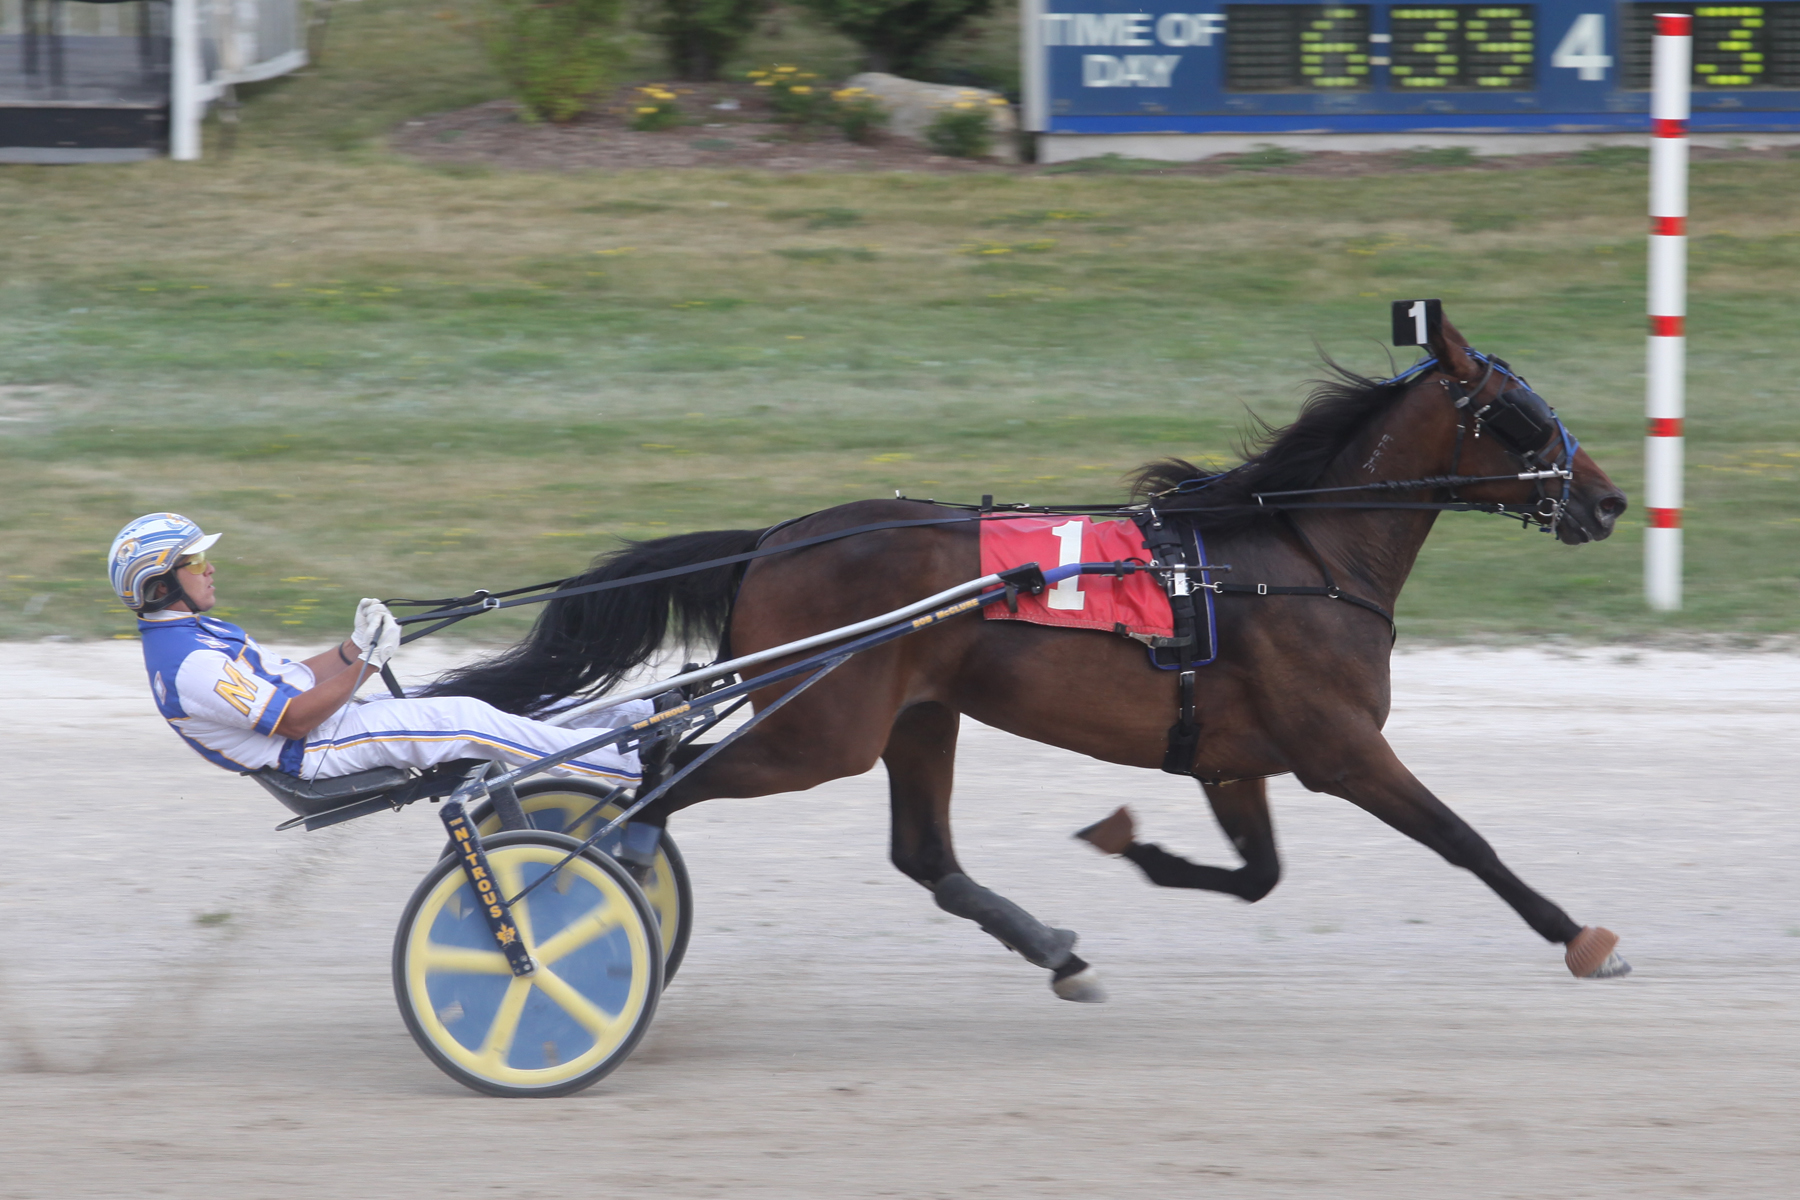 Delcrest Magicstar triumphs in her delayed Grassroots debut